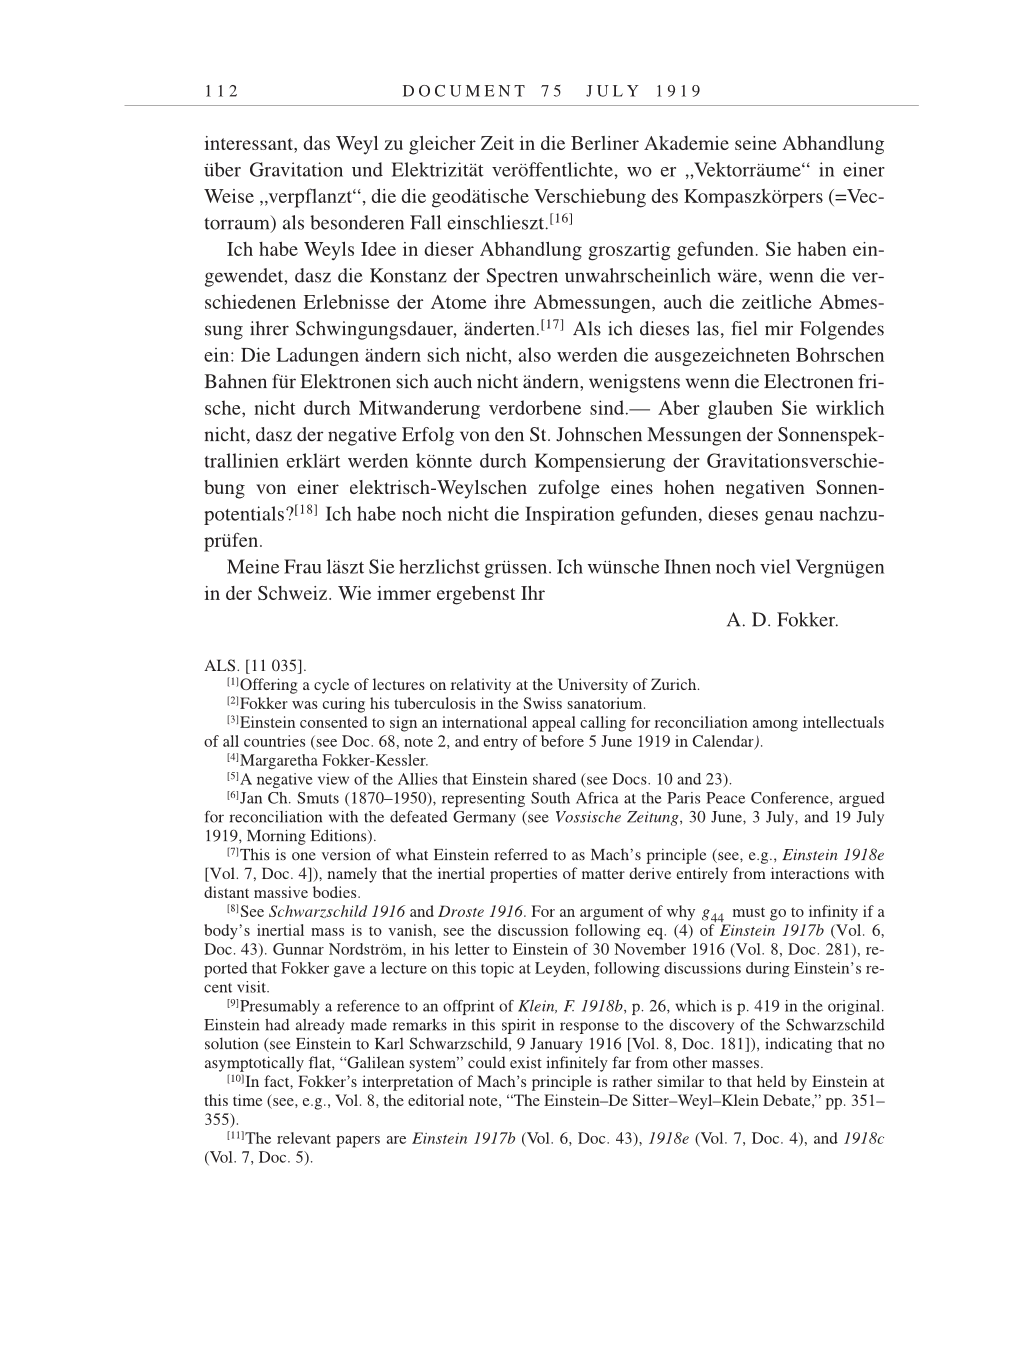 Volume 9: The Berlin Years: Correspondence January 1919-April 1920 page 112